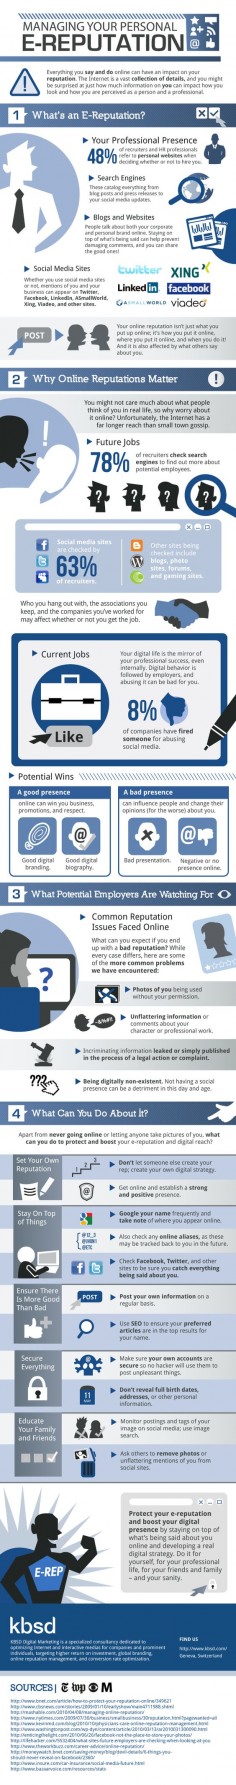 Protecting Your Online Rep: 4 things you NTK (infographic)